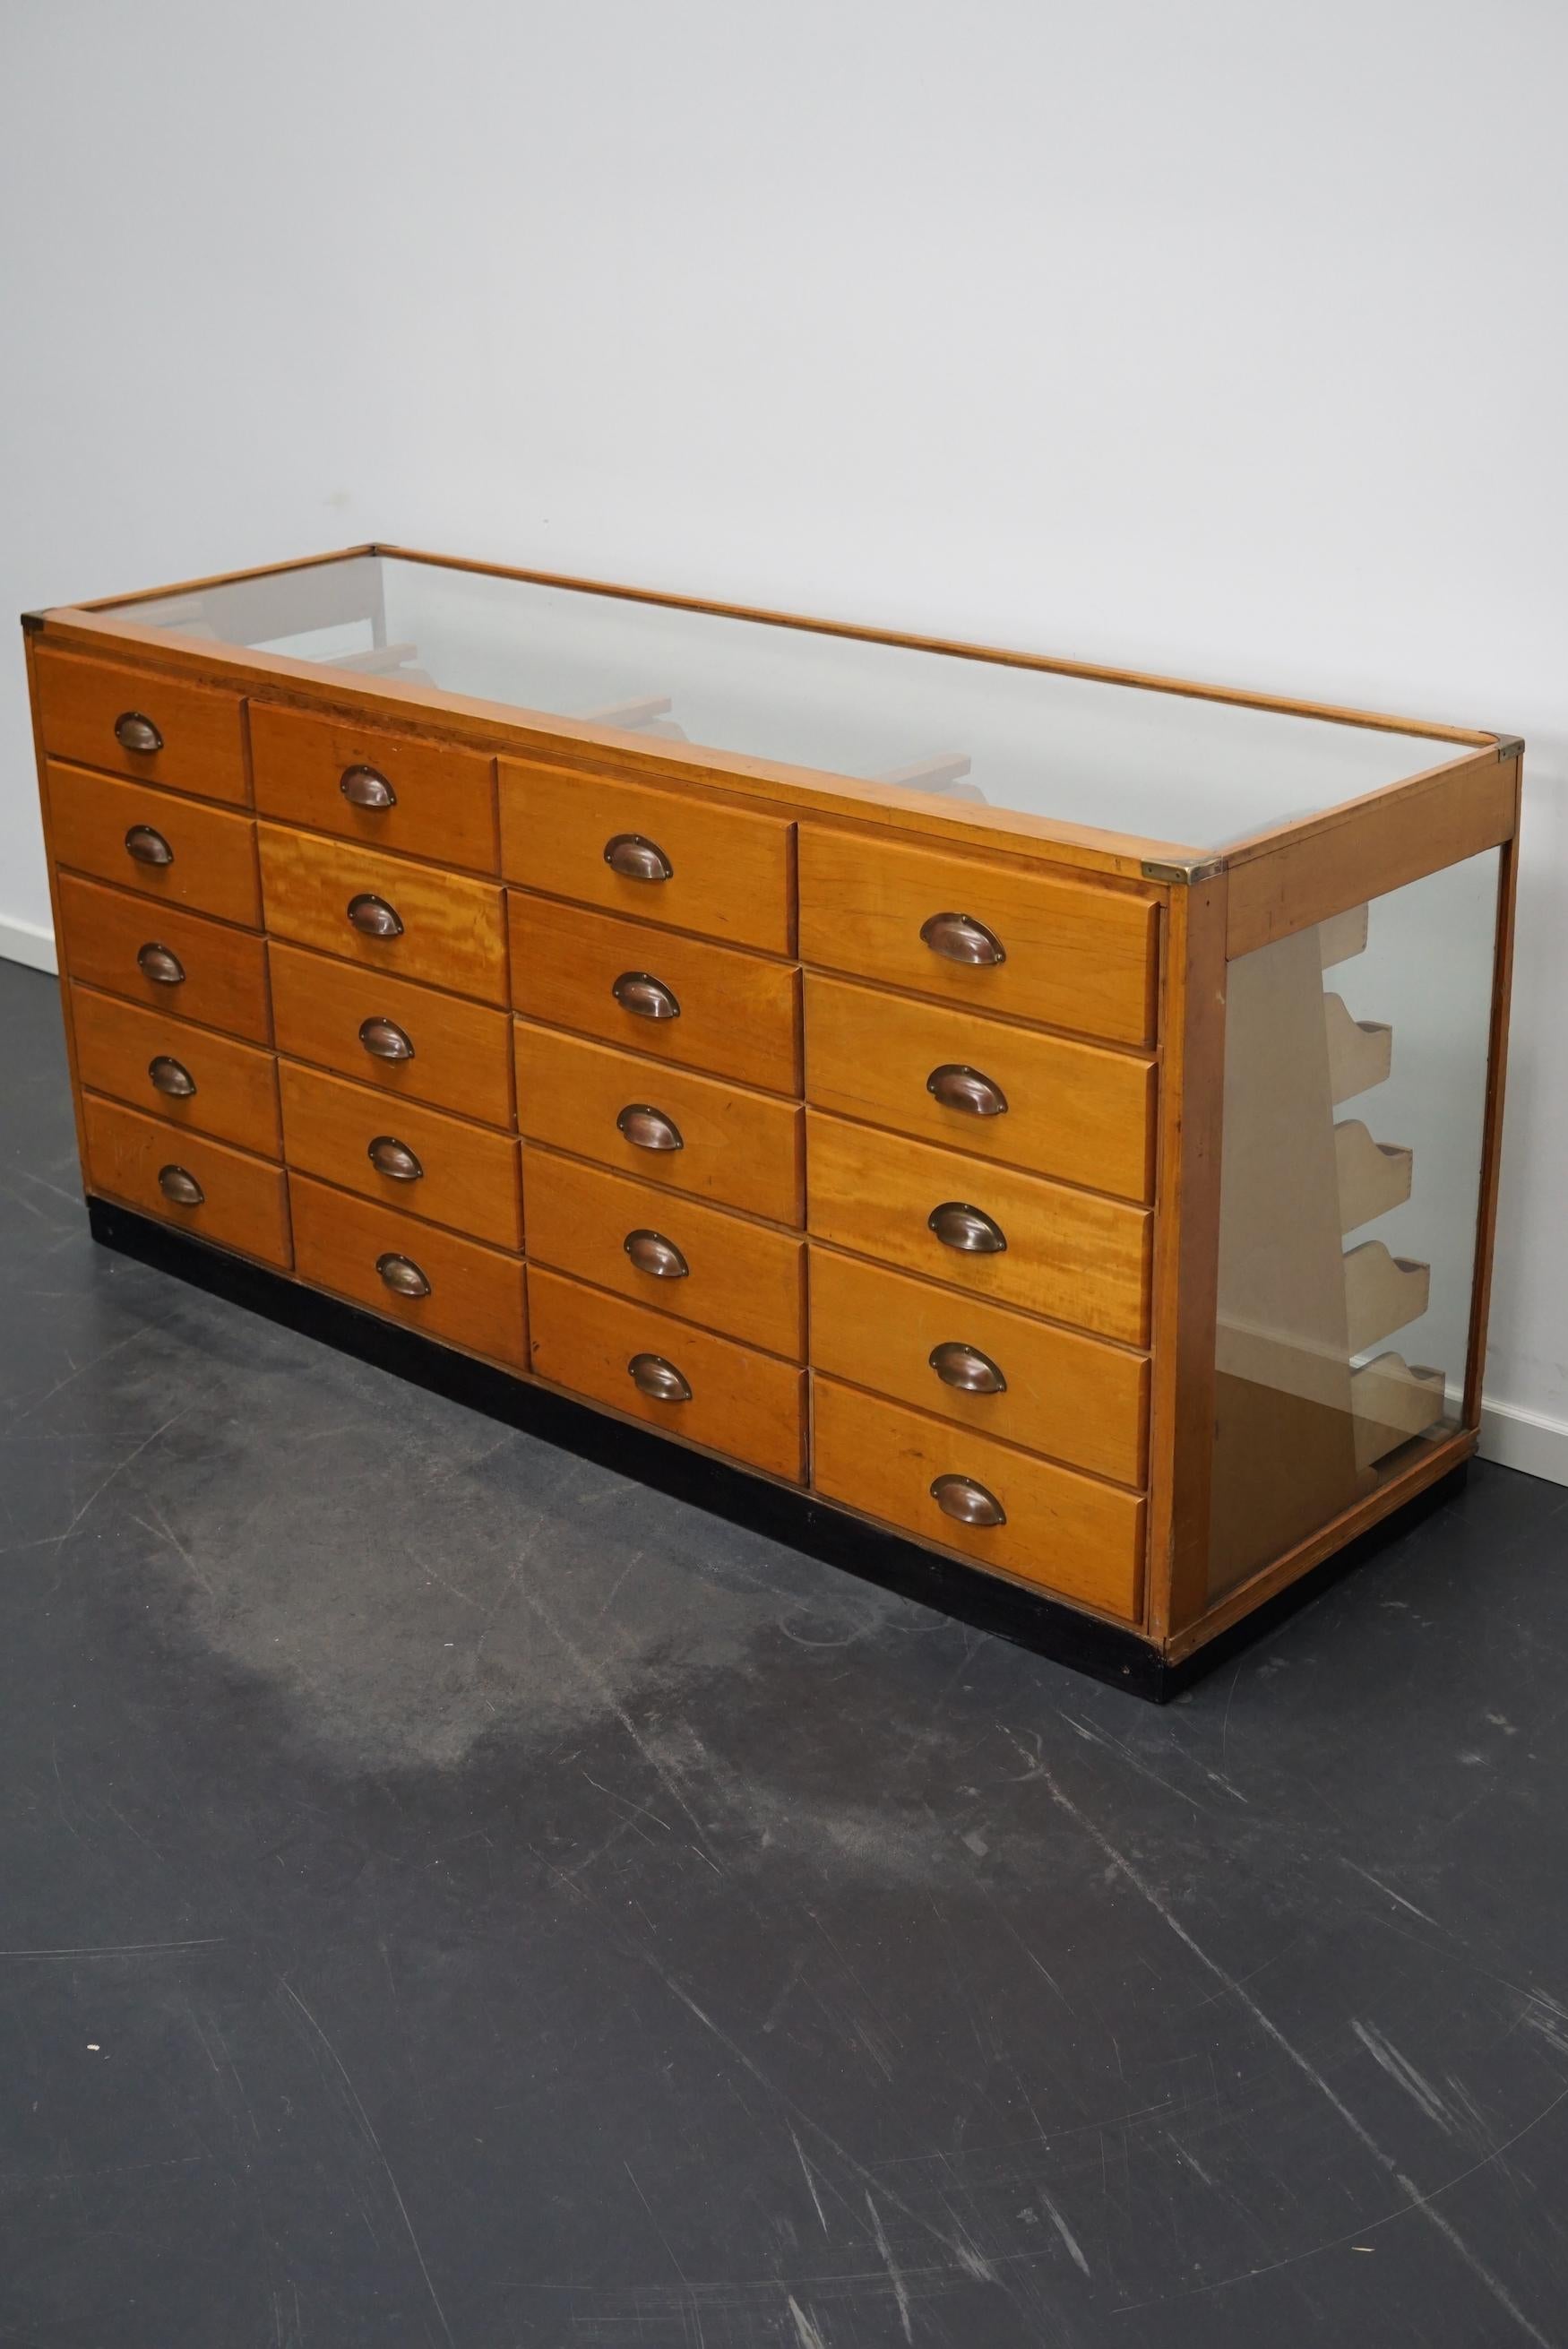 Mid-20th Century British Maple Haberdashery Cabinet or Shop Counter, 1930s